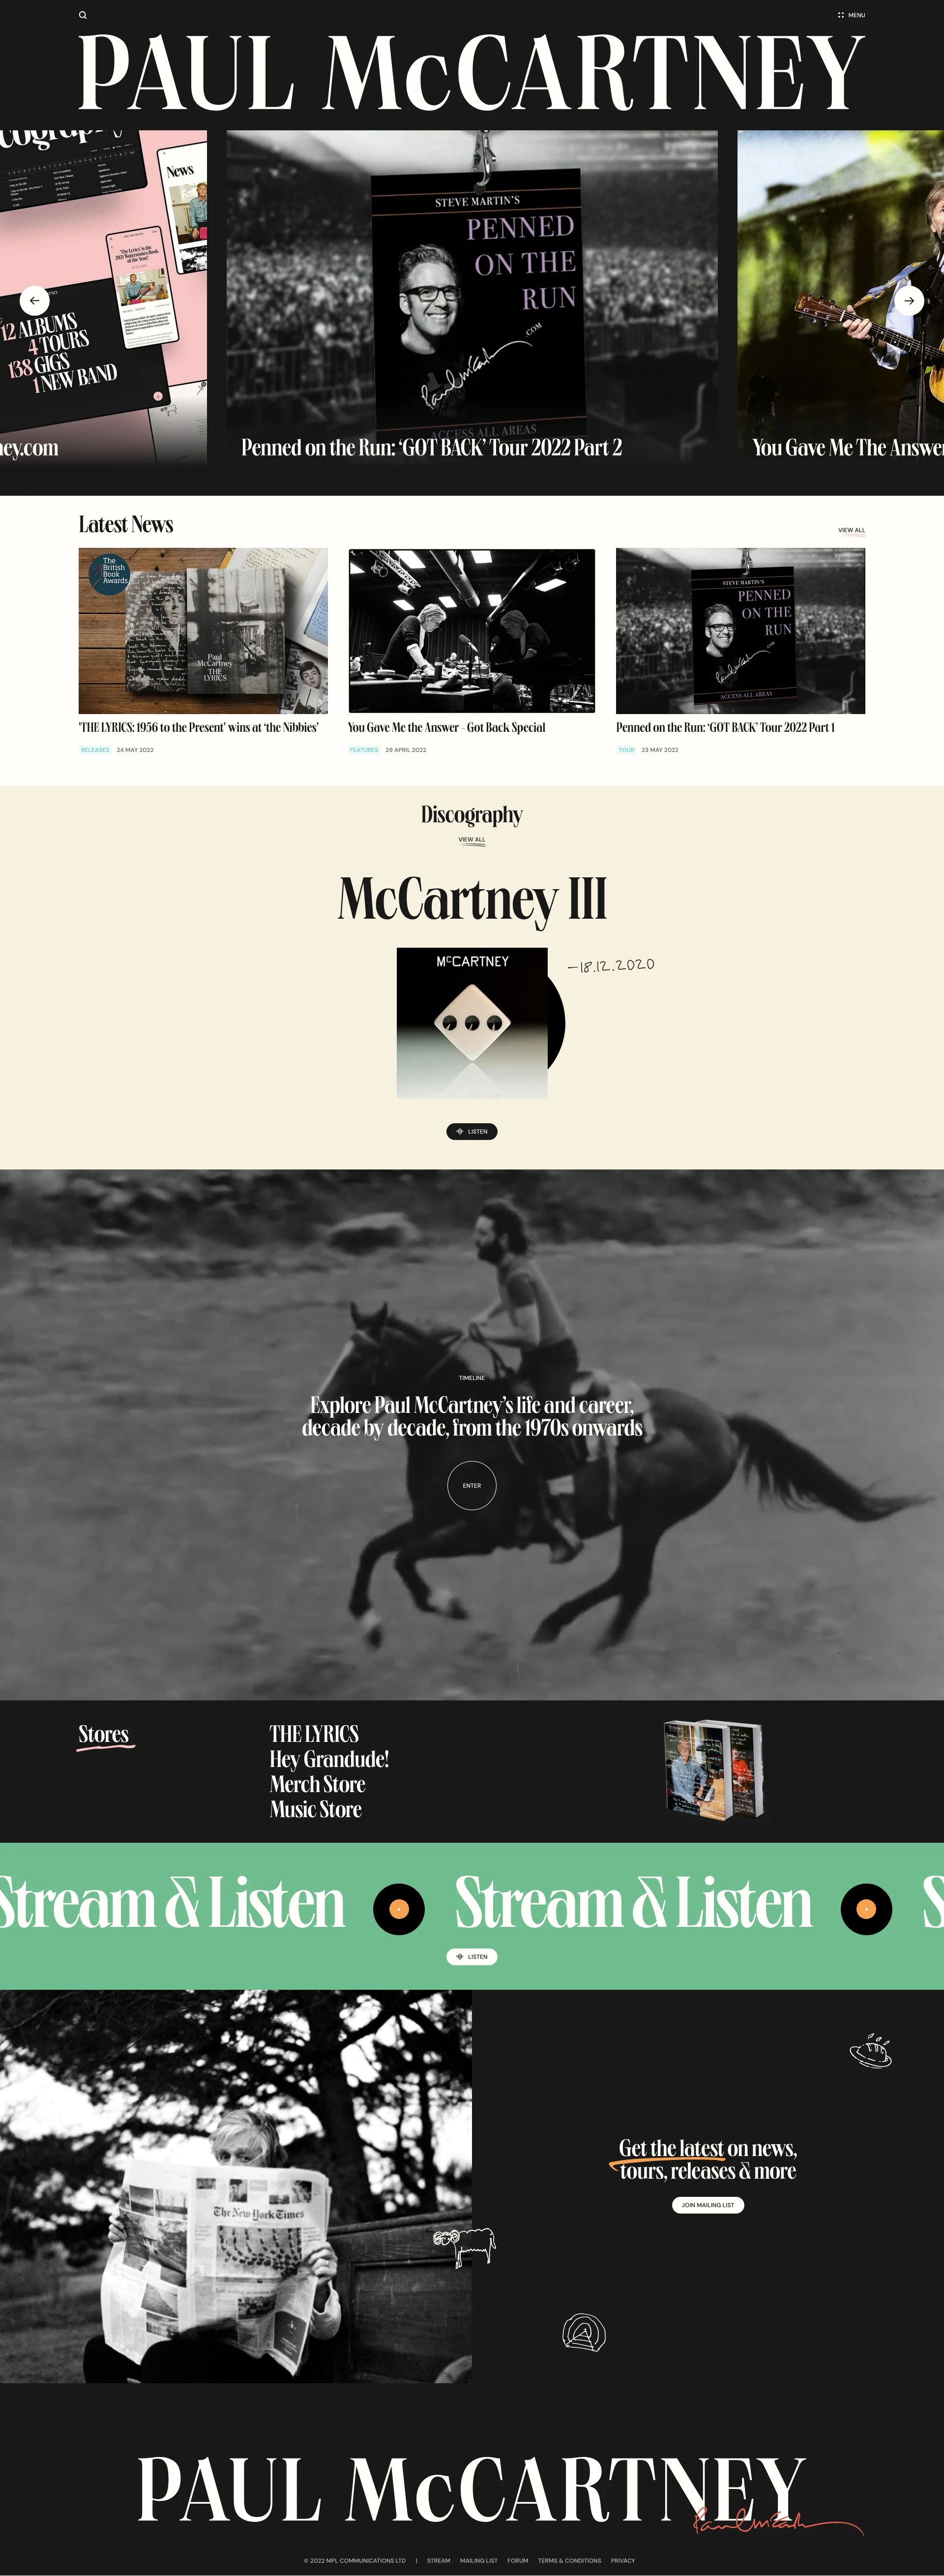 Paul McCartney Landing Page Example: Explore Paul McCartney’s life and career, decade by decade, from the 1970s onwards